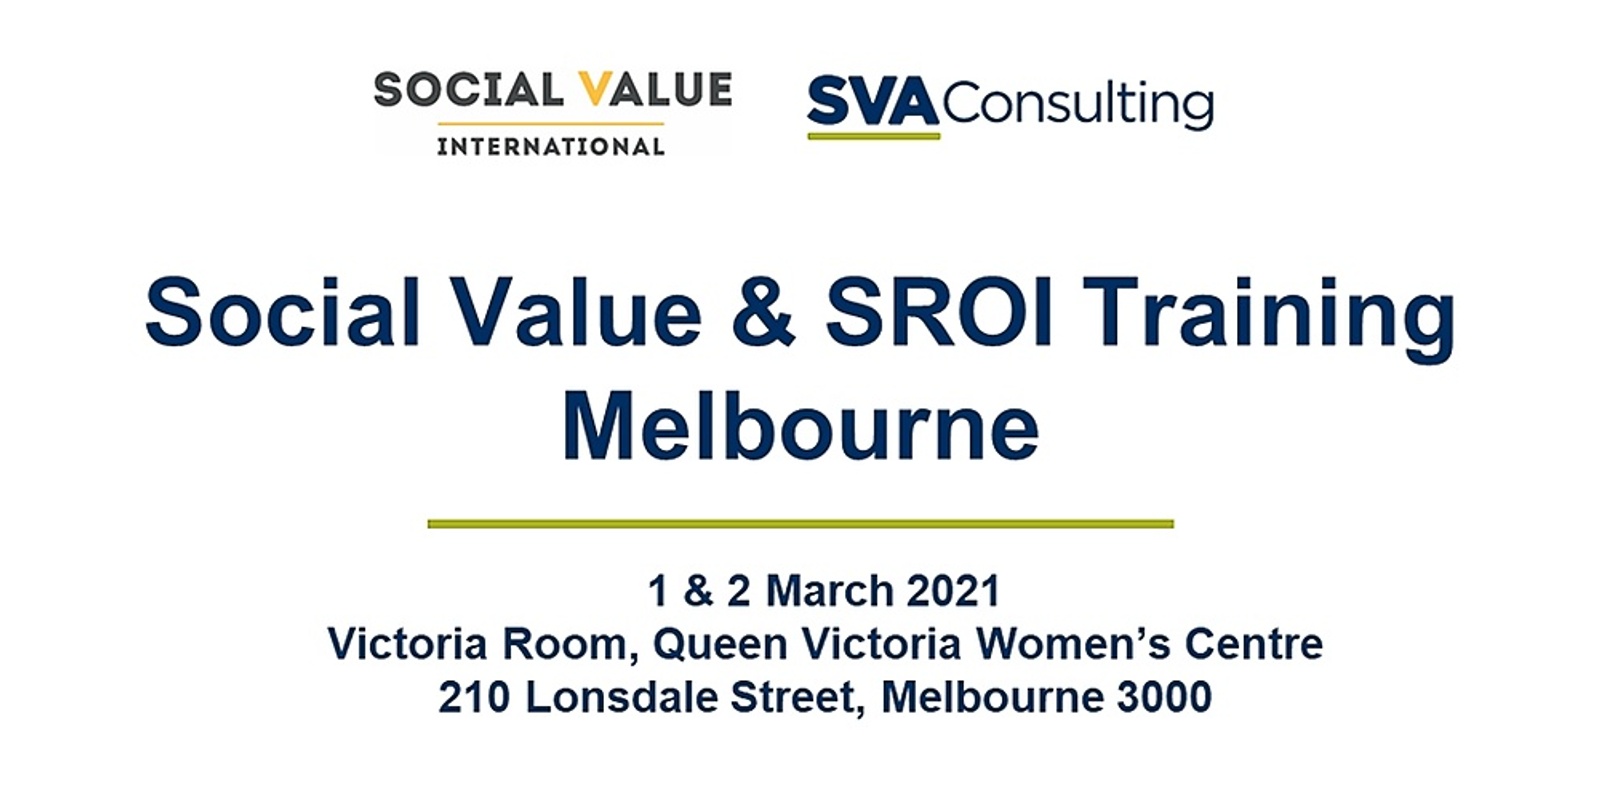 Banner image for Social Value & SROI Training Melbourne 1 & 2 March 2021